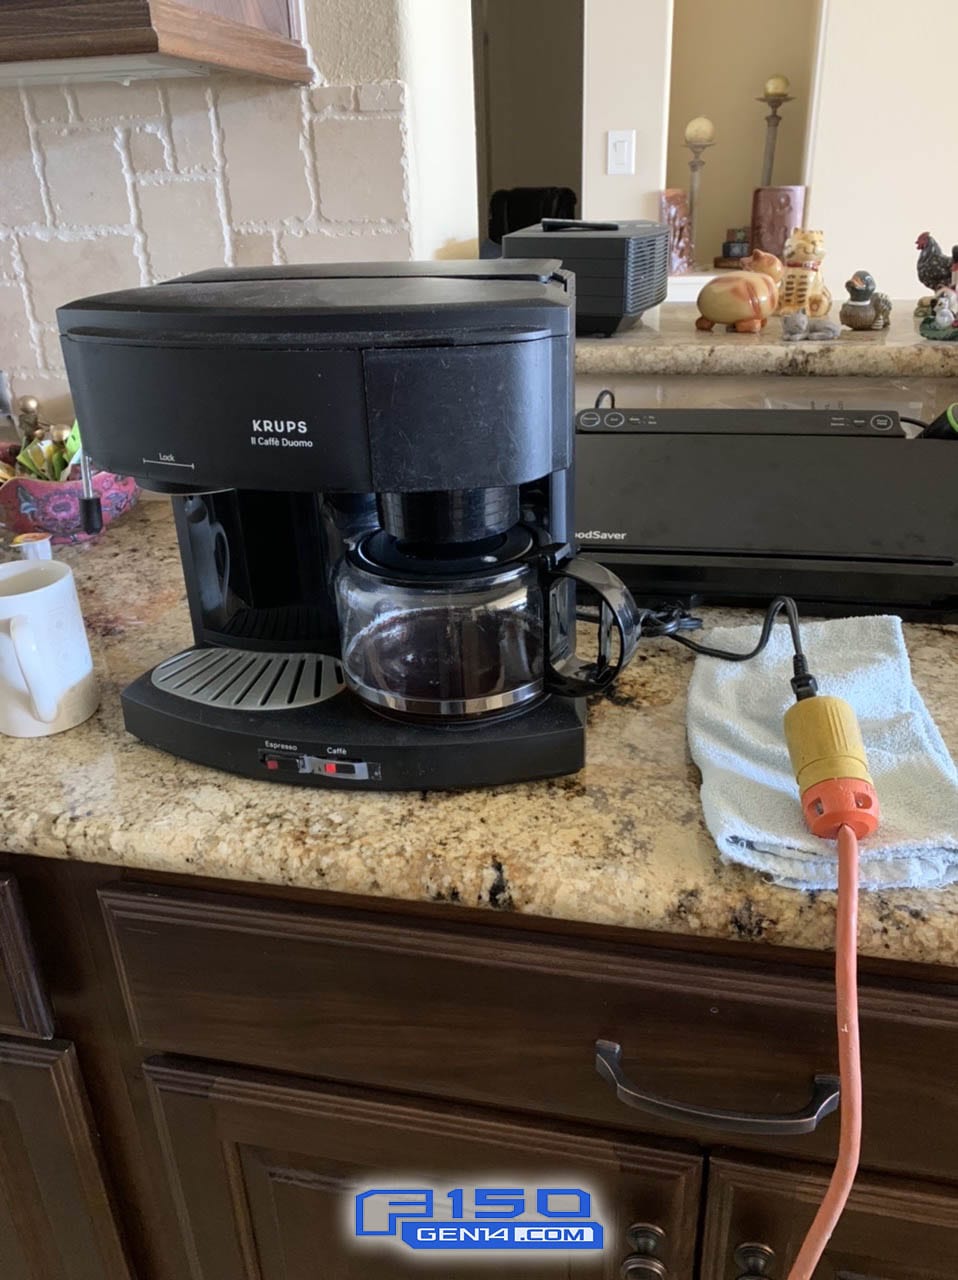 A black coffee maker on a counter